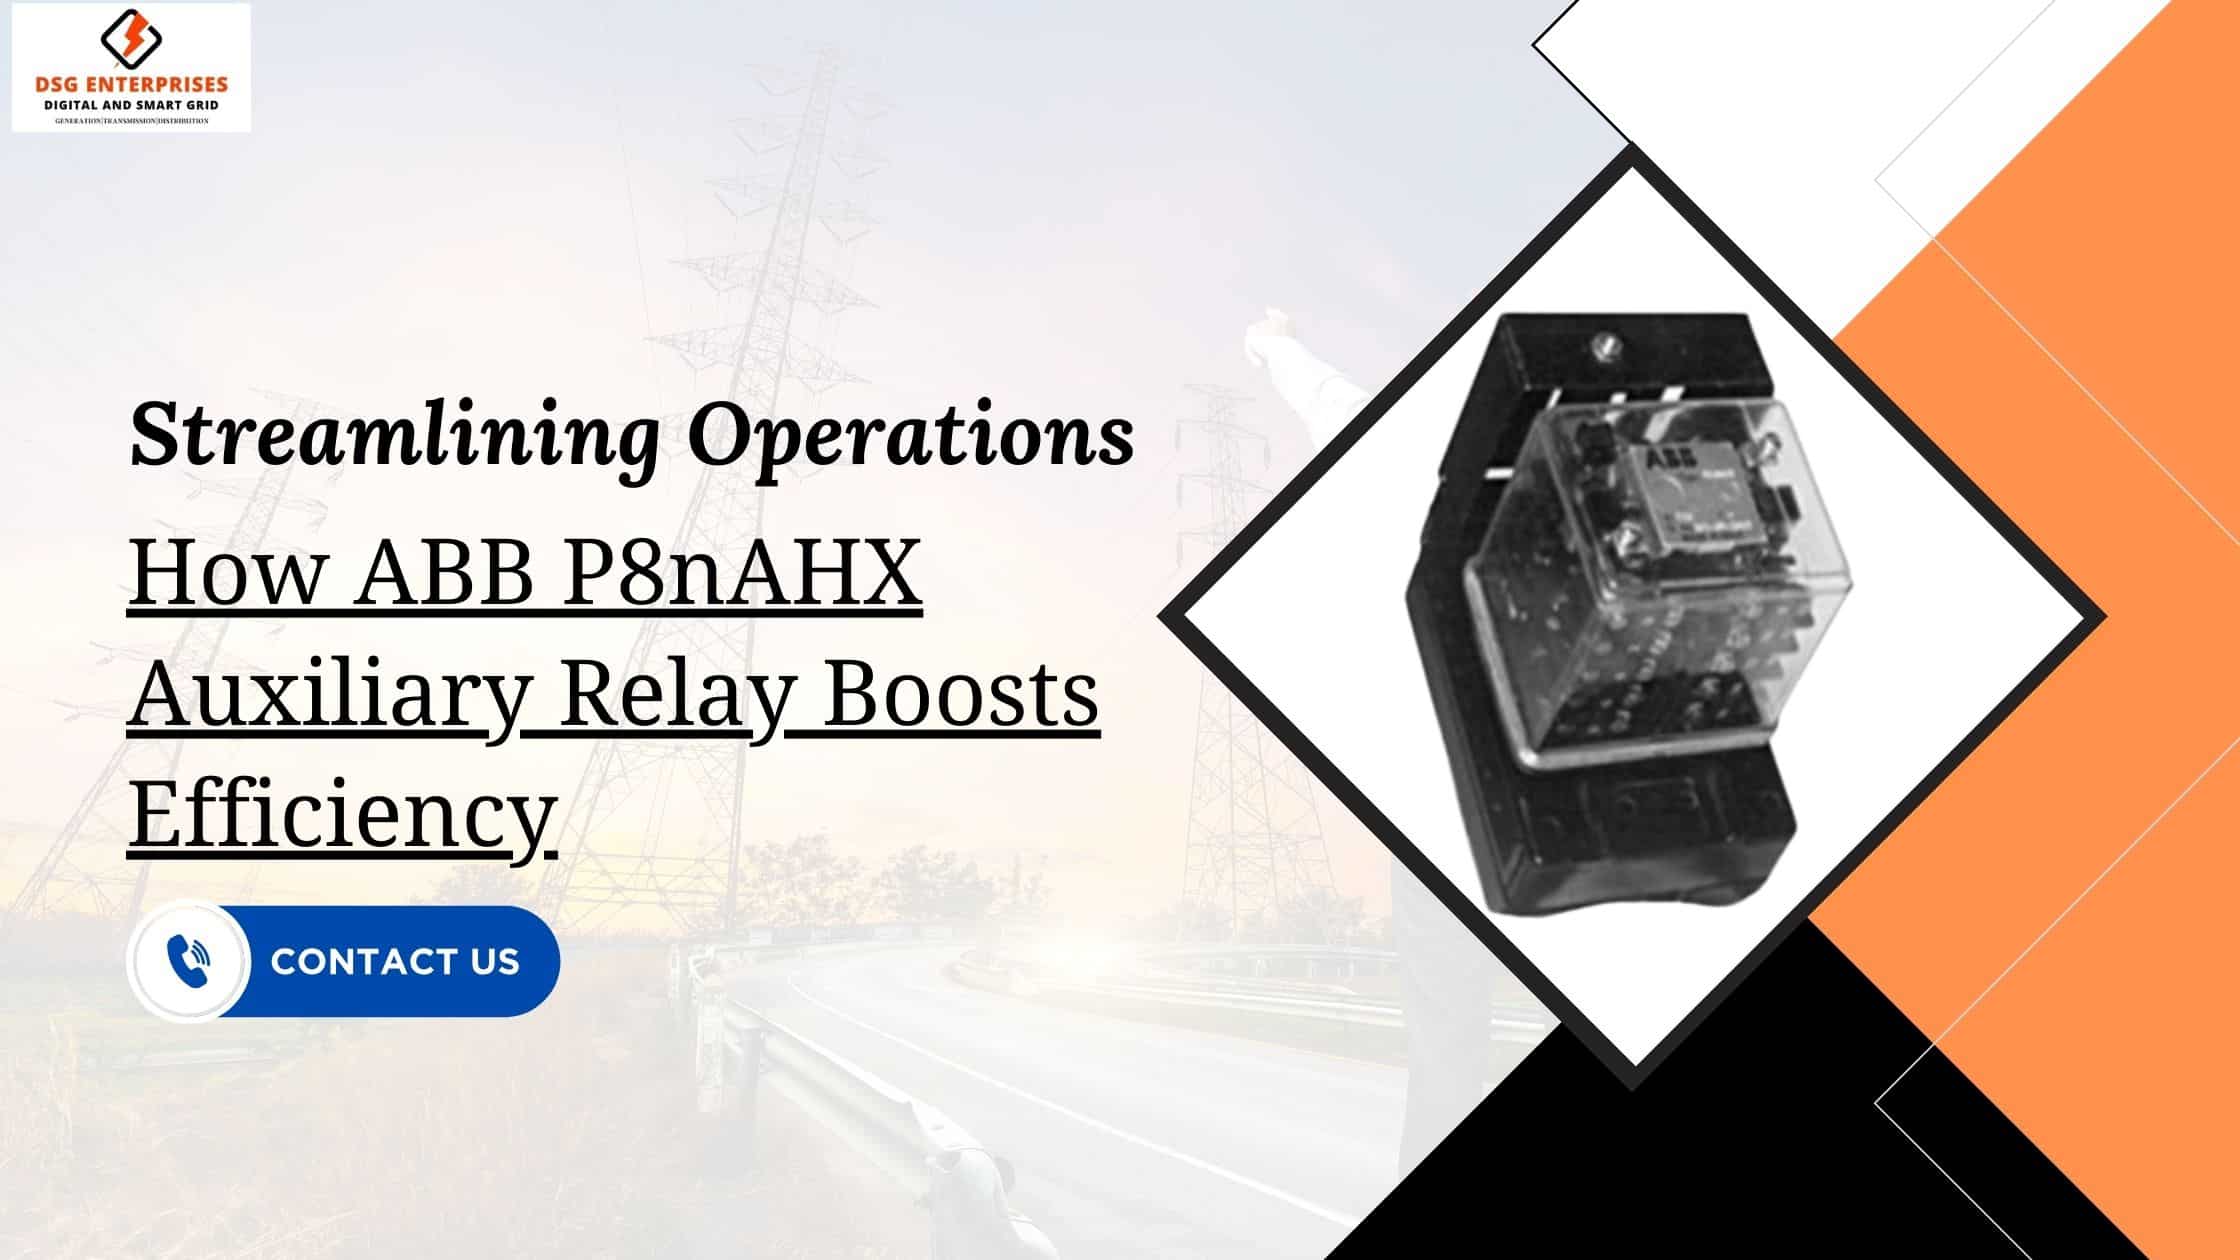 You are currently viewing Streamlining Operations: How ABB P8nAHX Auxiliary Relay Boosts Efficiency